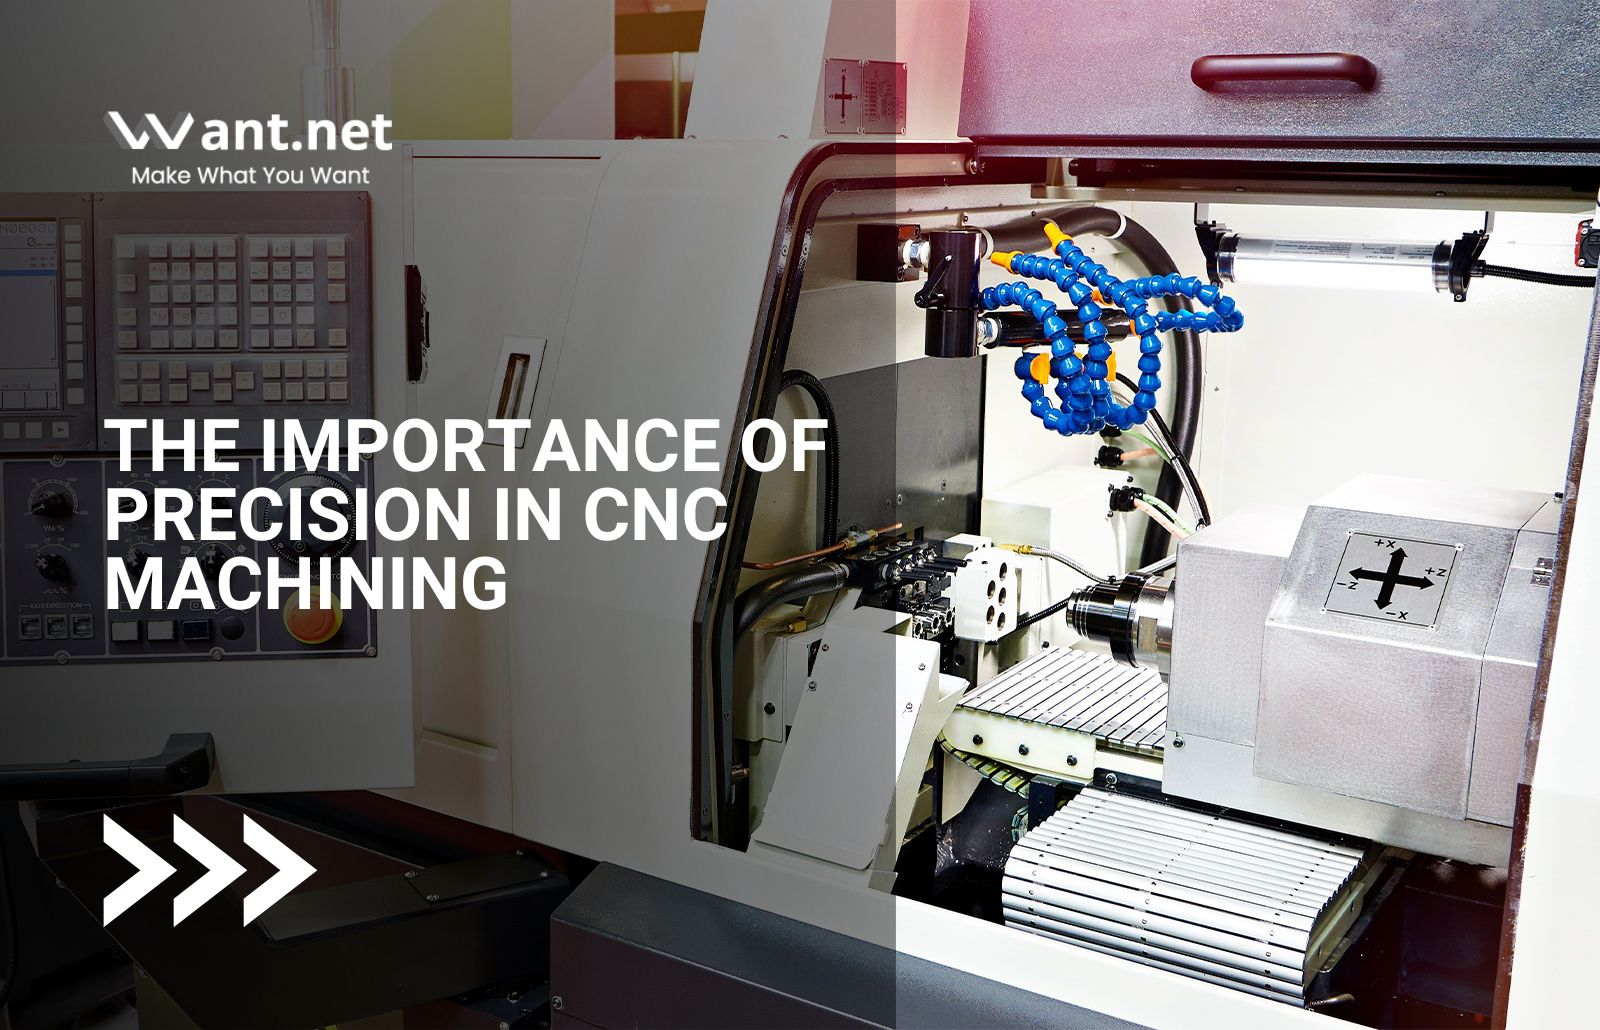 The Importance of Precision in CNC Machining